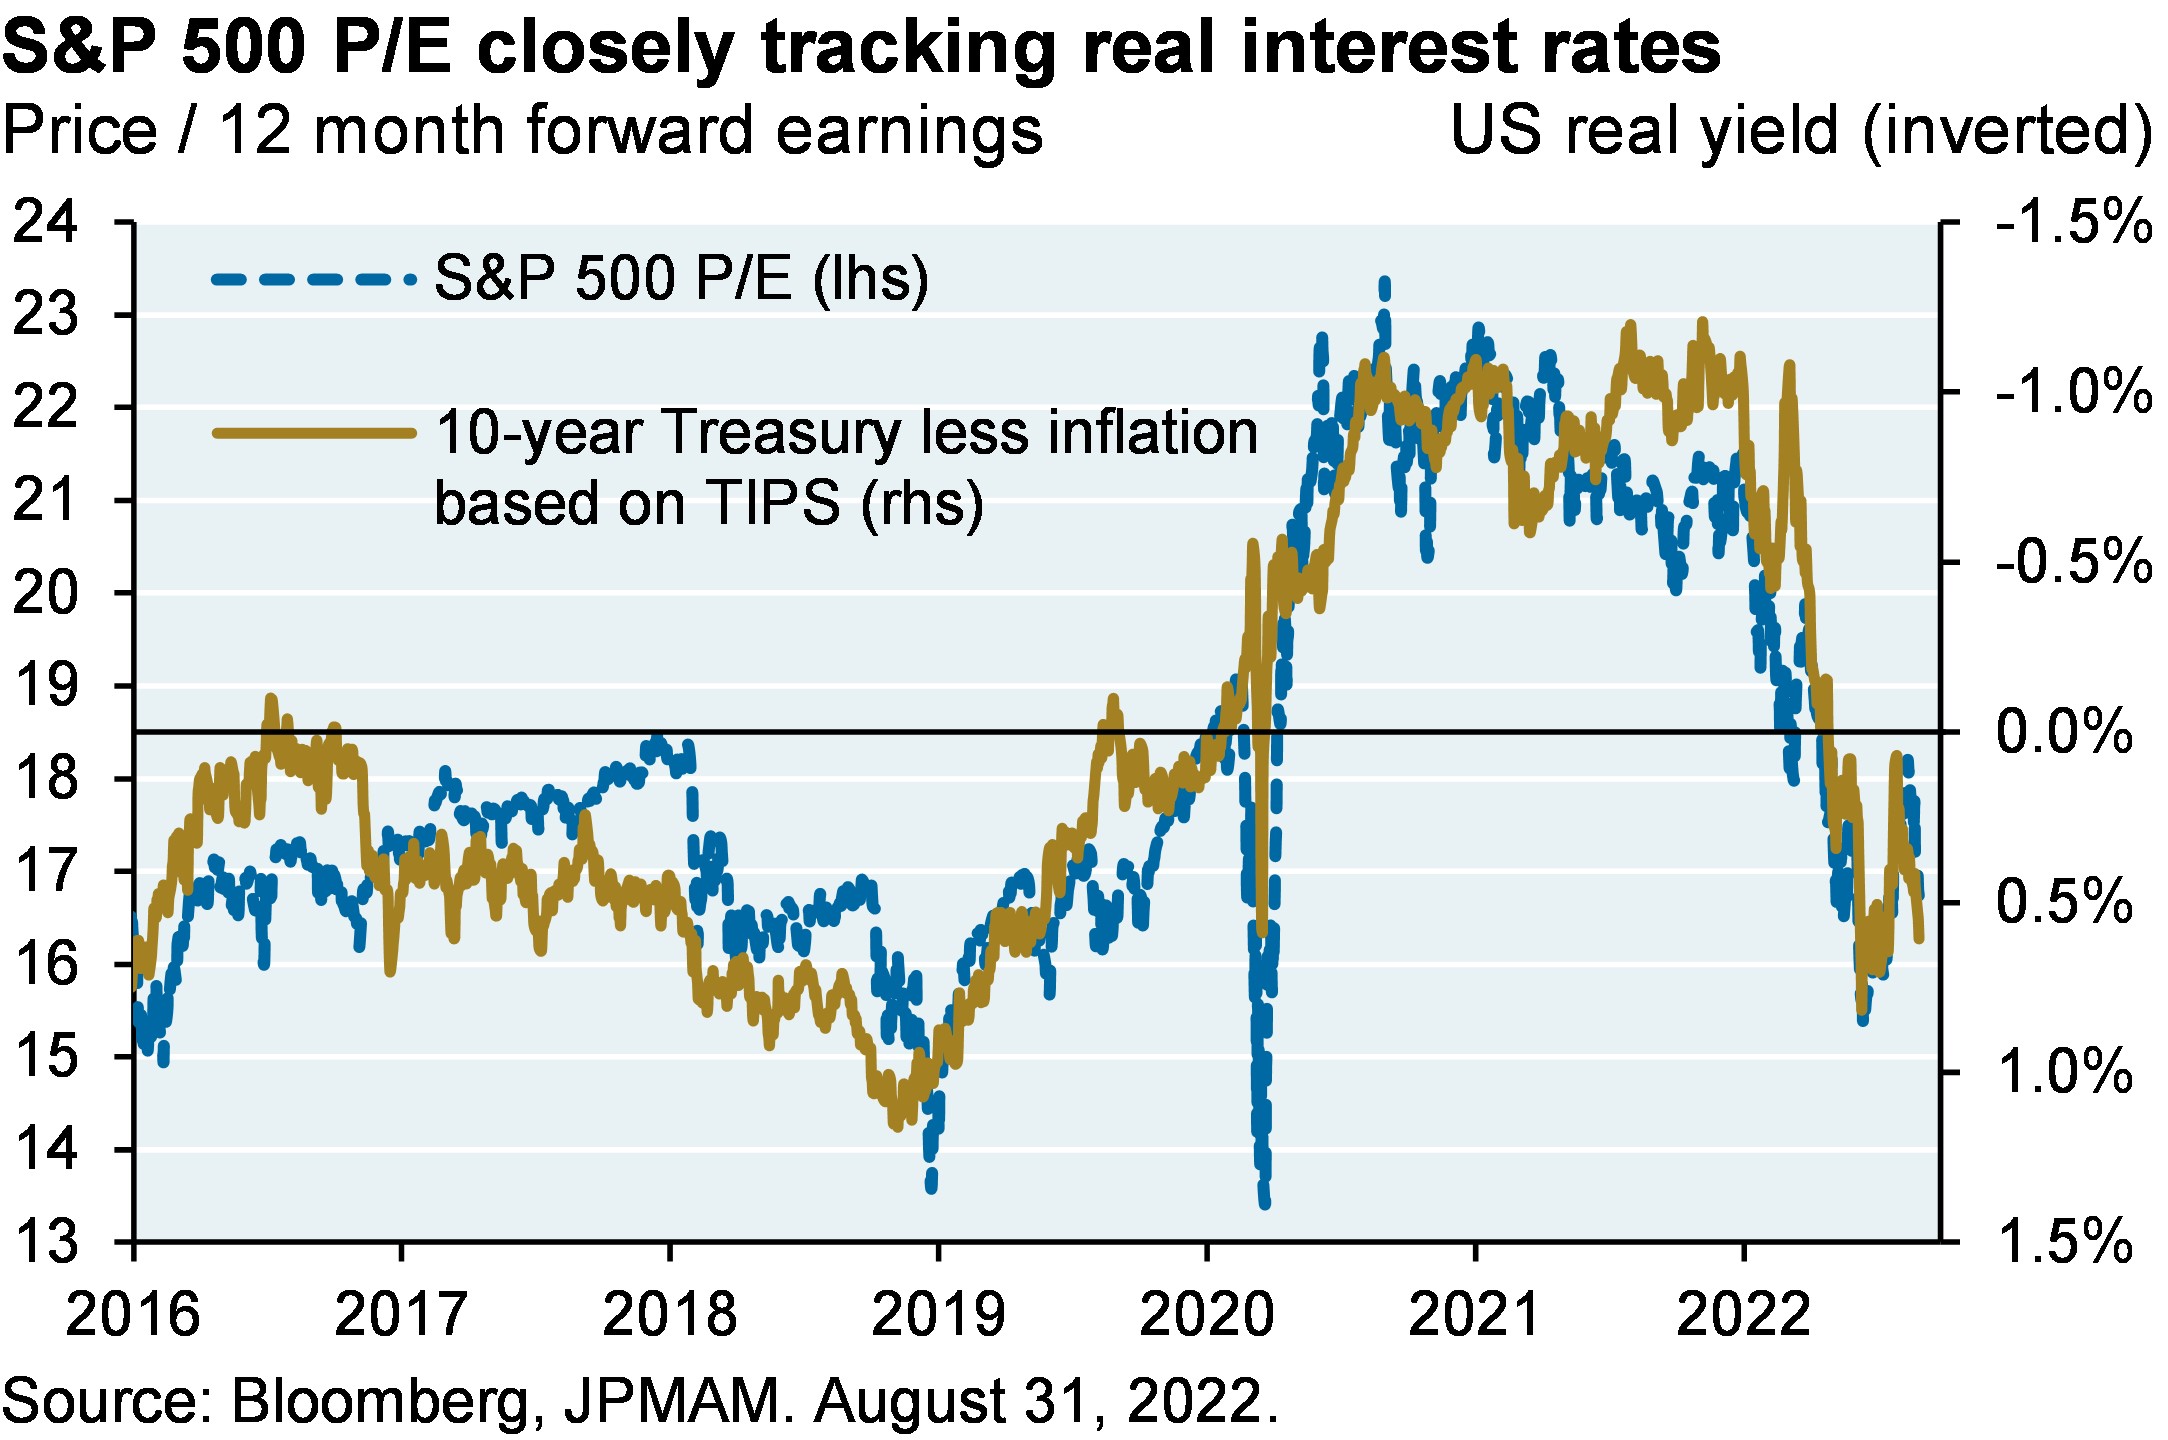 S&P 500 P/E closely tracking real interest rates